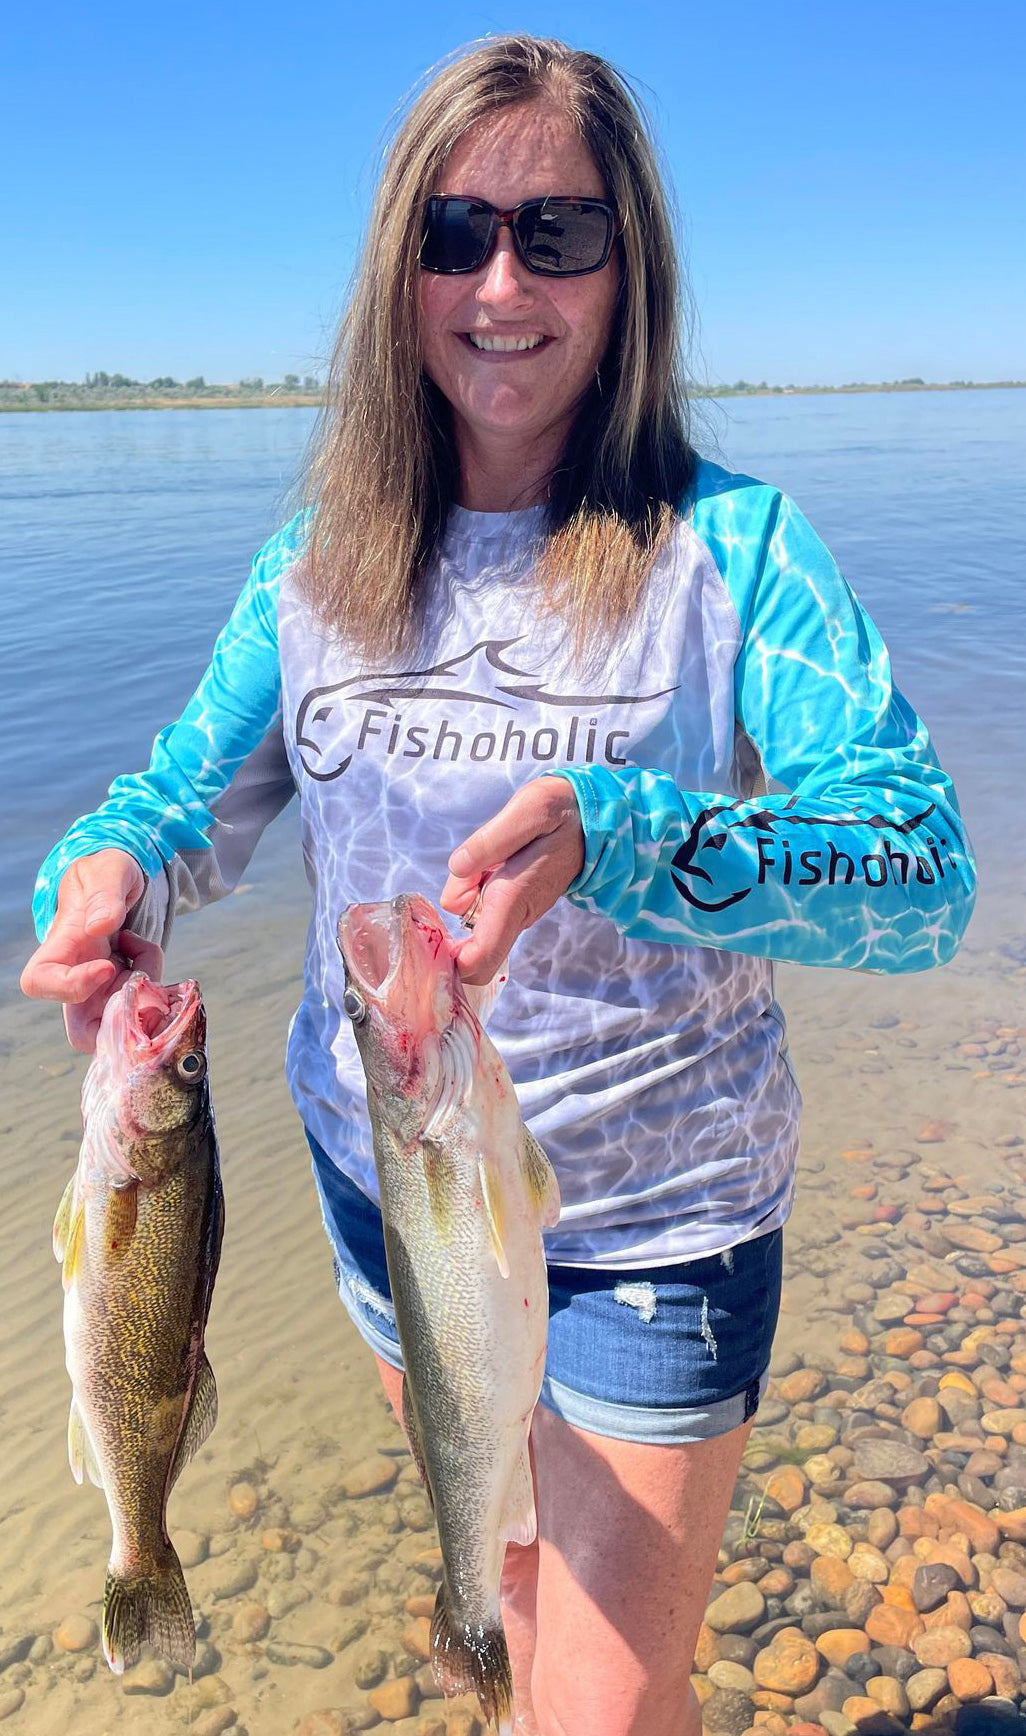  Fishoholic UPF 50 Women's Performance Fishing Shirt - Long  Sleeve - Women's Cut - Breathable Quick Dry Sun Protection  (wm-LS-gryCORALh2o-S) : Clothing, Shoes & Jewelry